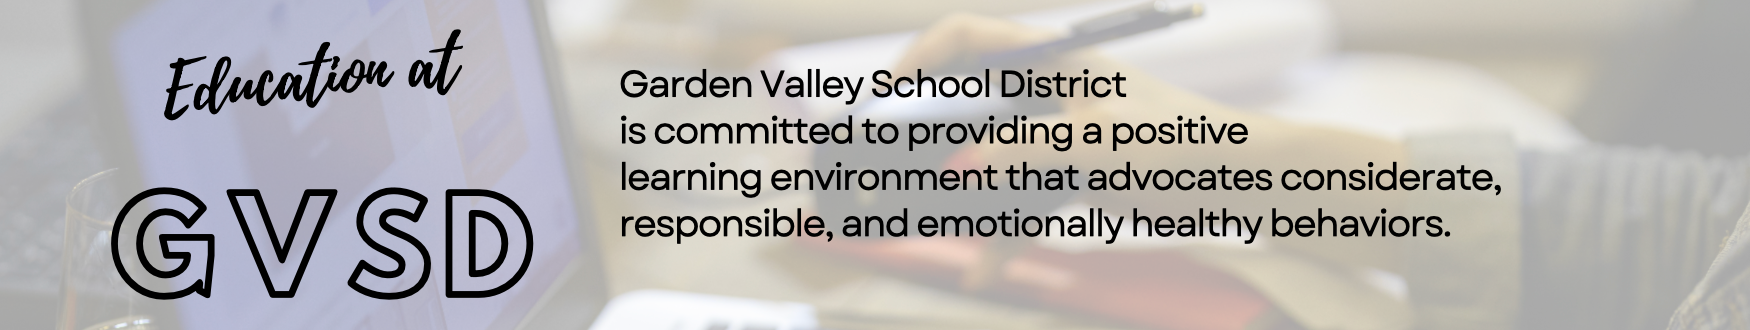 Education at GVSD Garden Valley School District is committed to providing a positive learning environment that advocates considerate, responsible, and emotionally healthy behaviors.